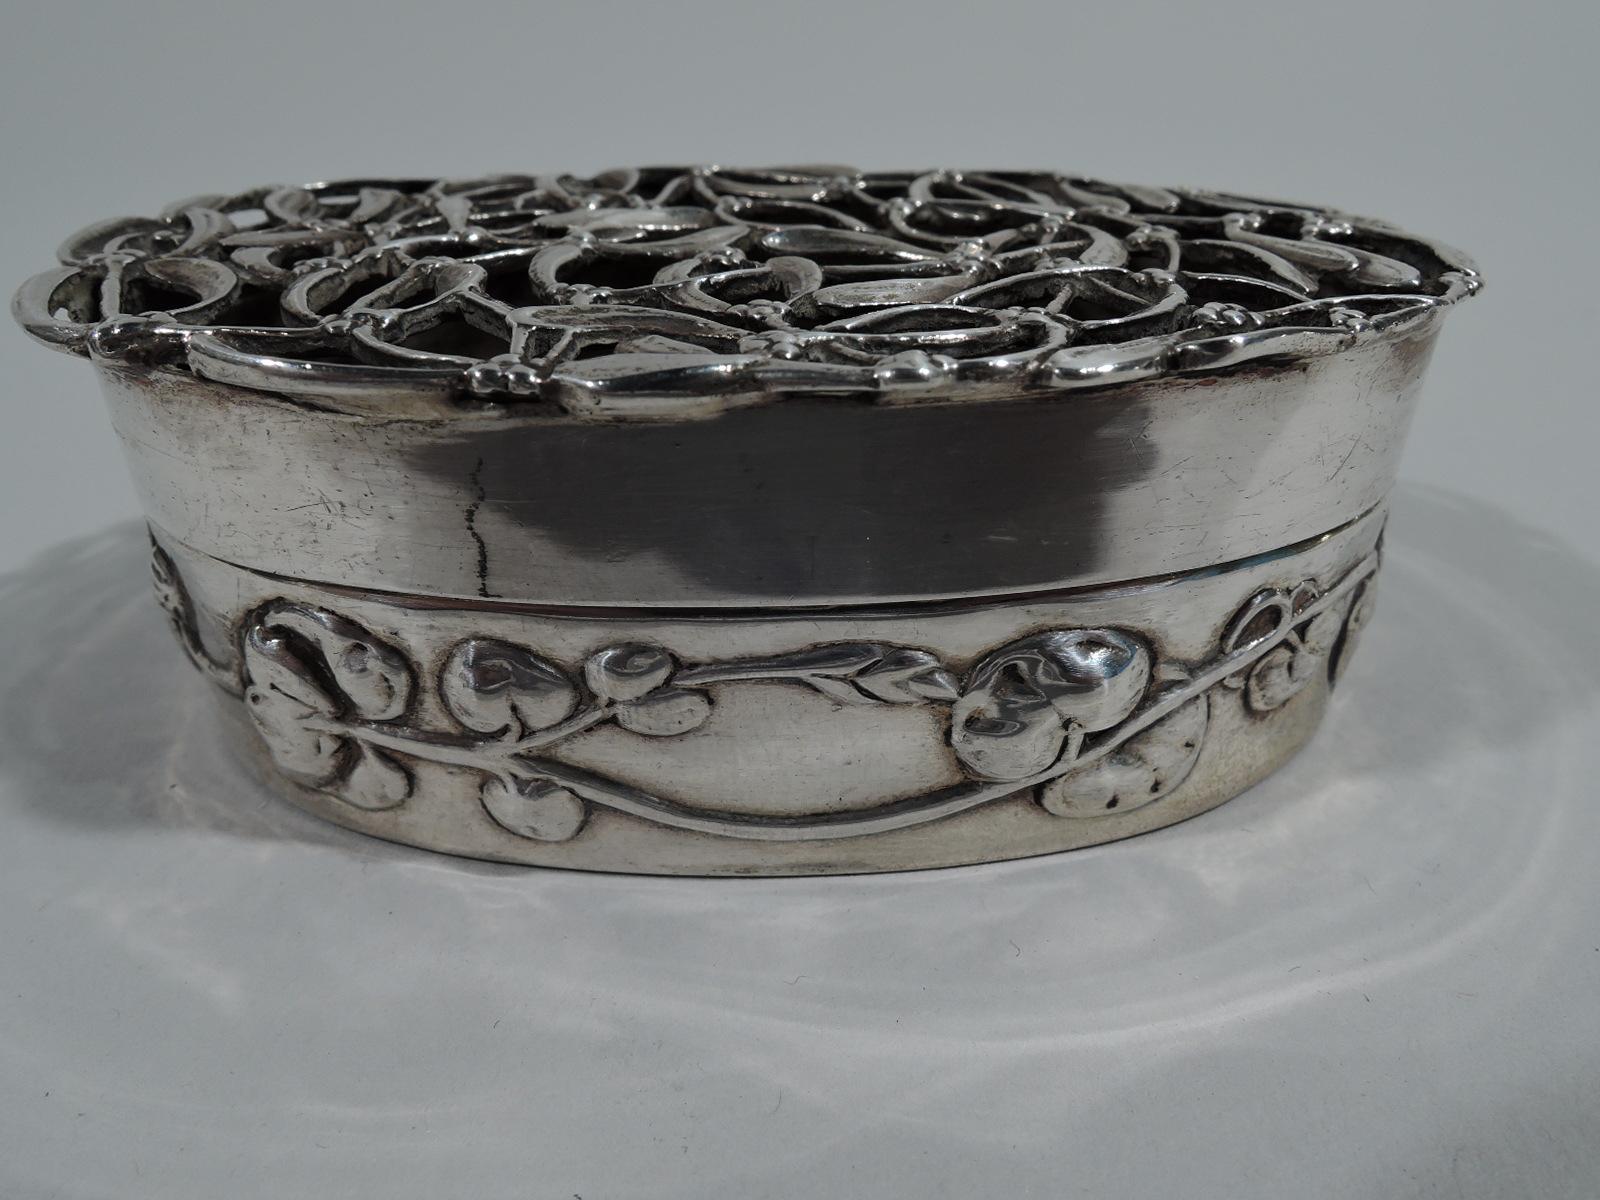 Edwardian sterling silver trinket box. Made by William Comyns in London 1909. Oval with straight sides and chased flowering and leafing tendril. Open cover top comprising leaves and berries. Fully marked. Numbered A1330. Weight: 1.5 troy ounces.